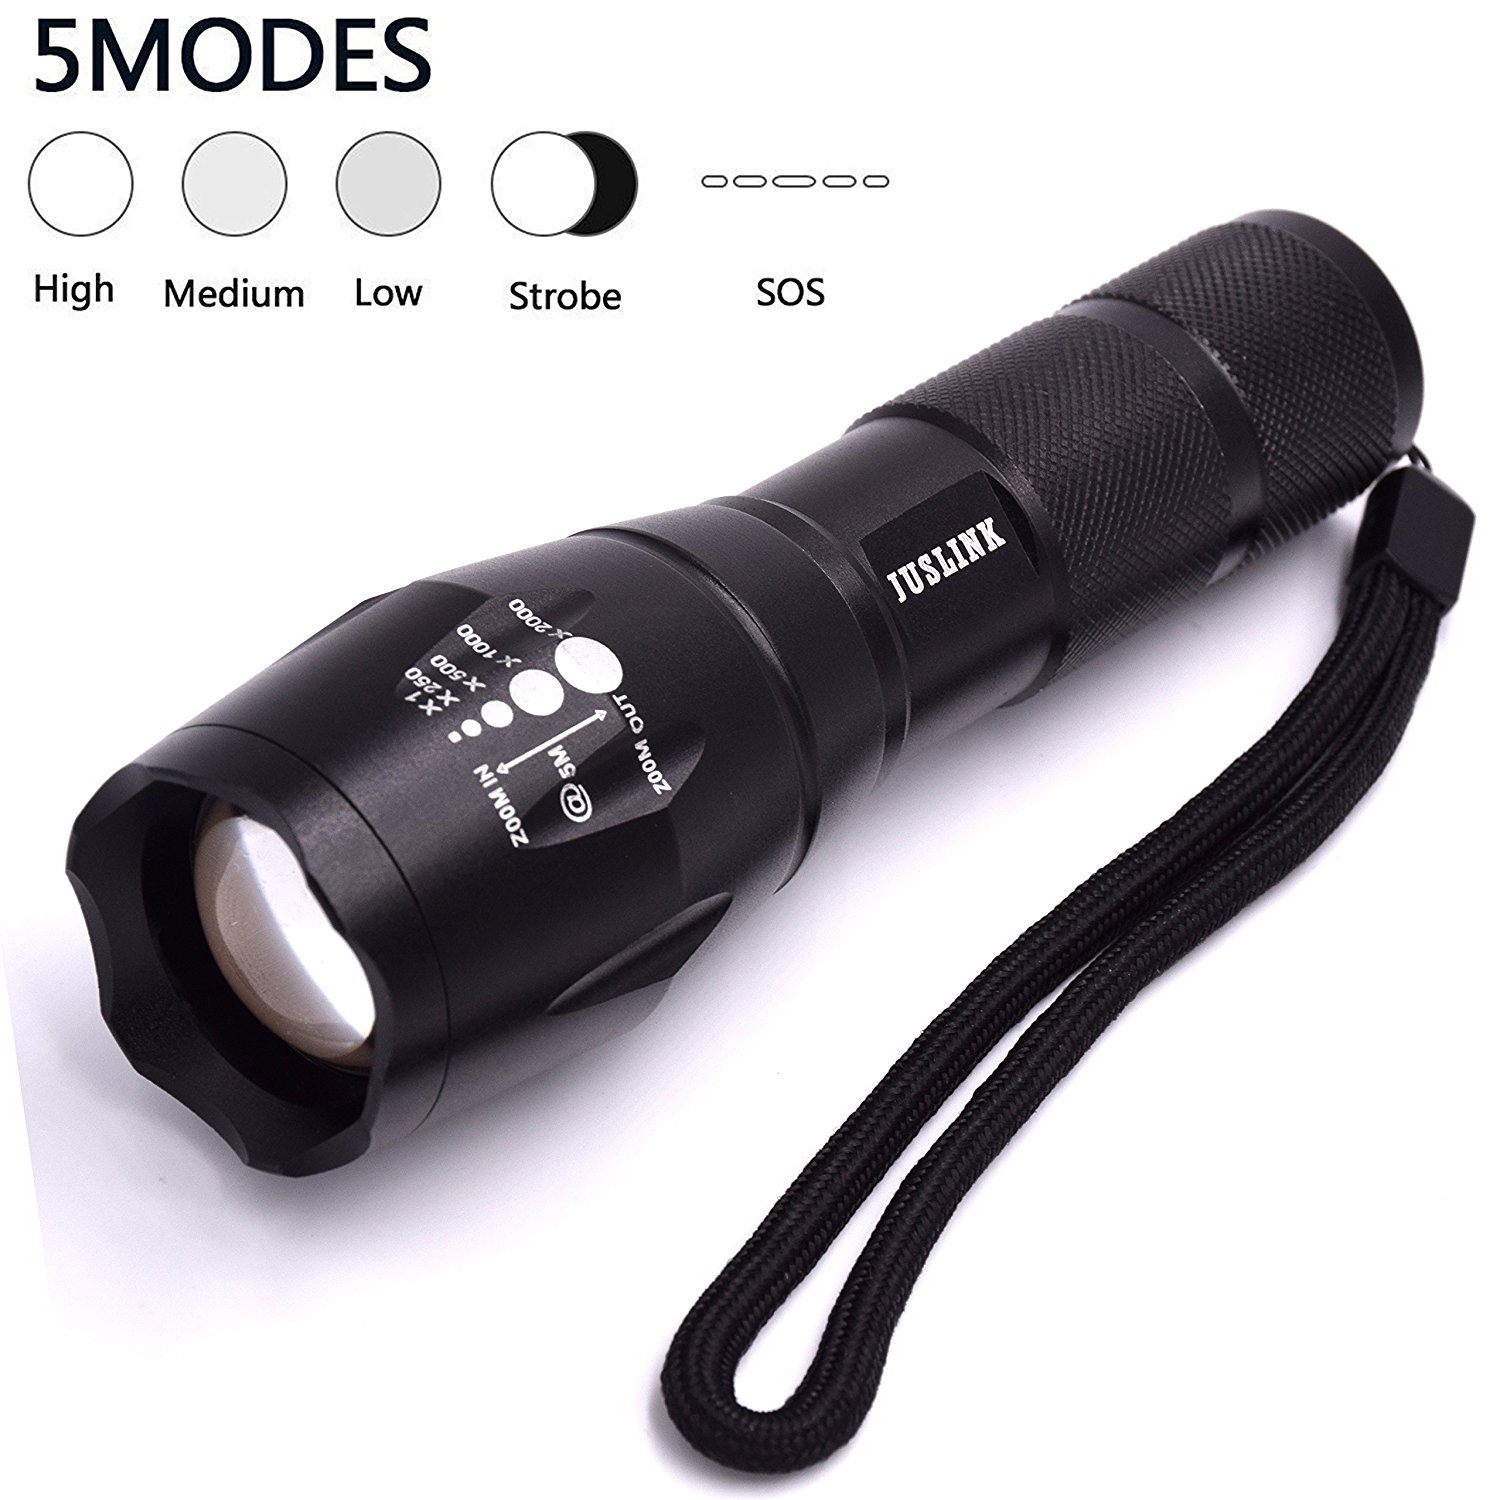 6 Best Flashlights For Walking At Night Reviews And Buying Guide